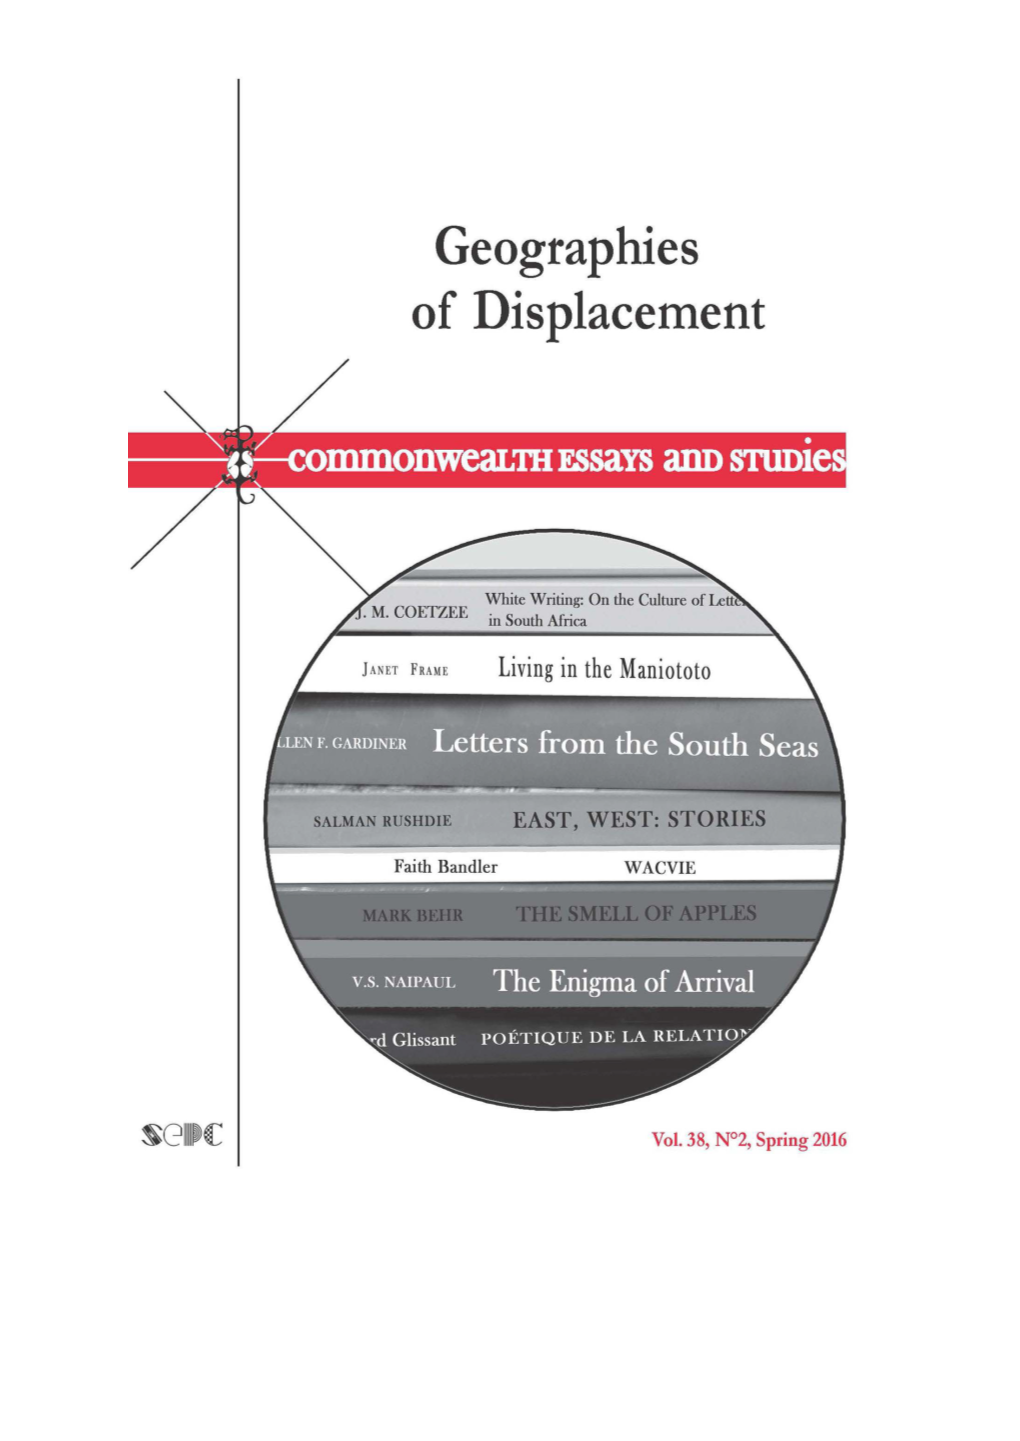 Geographies of Displacement